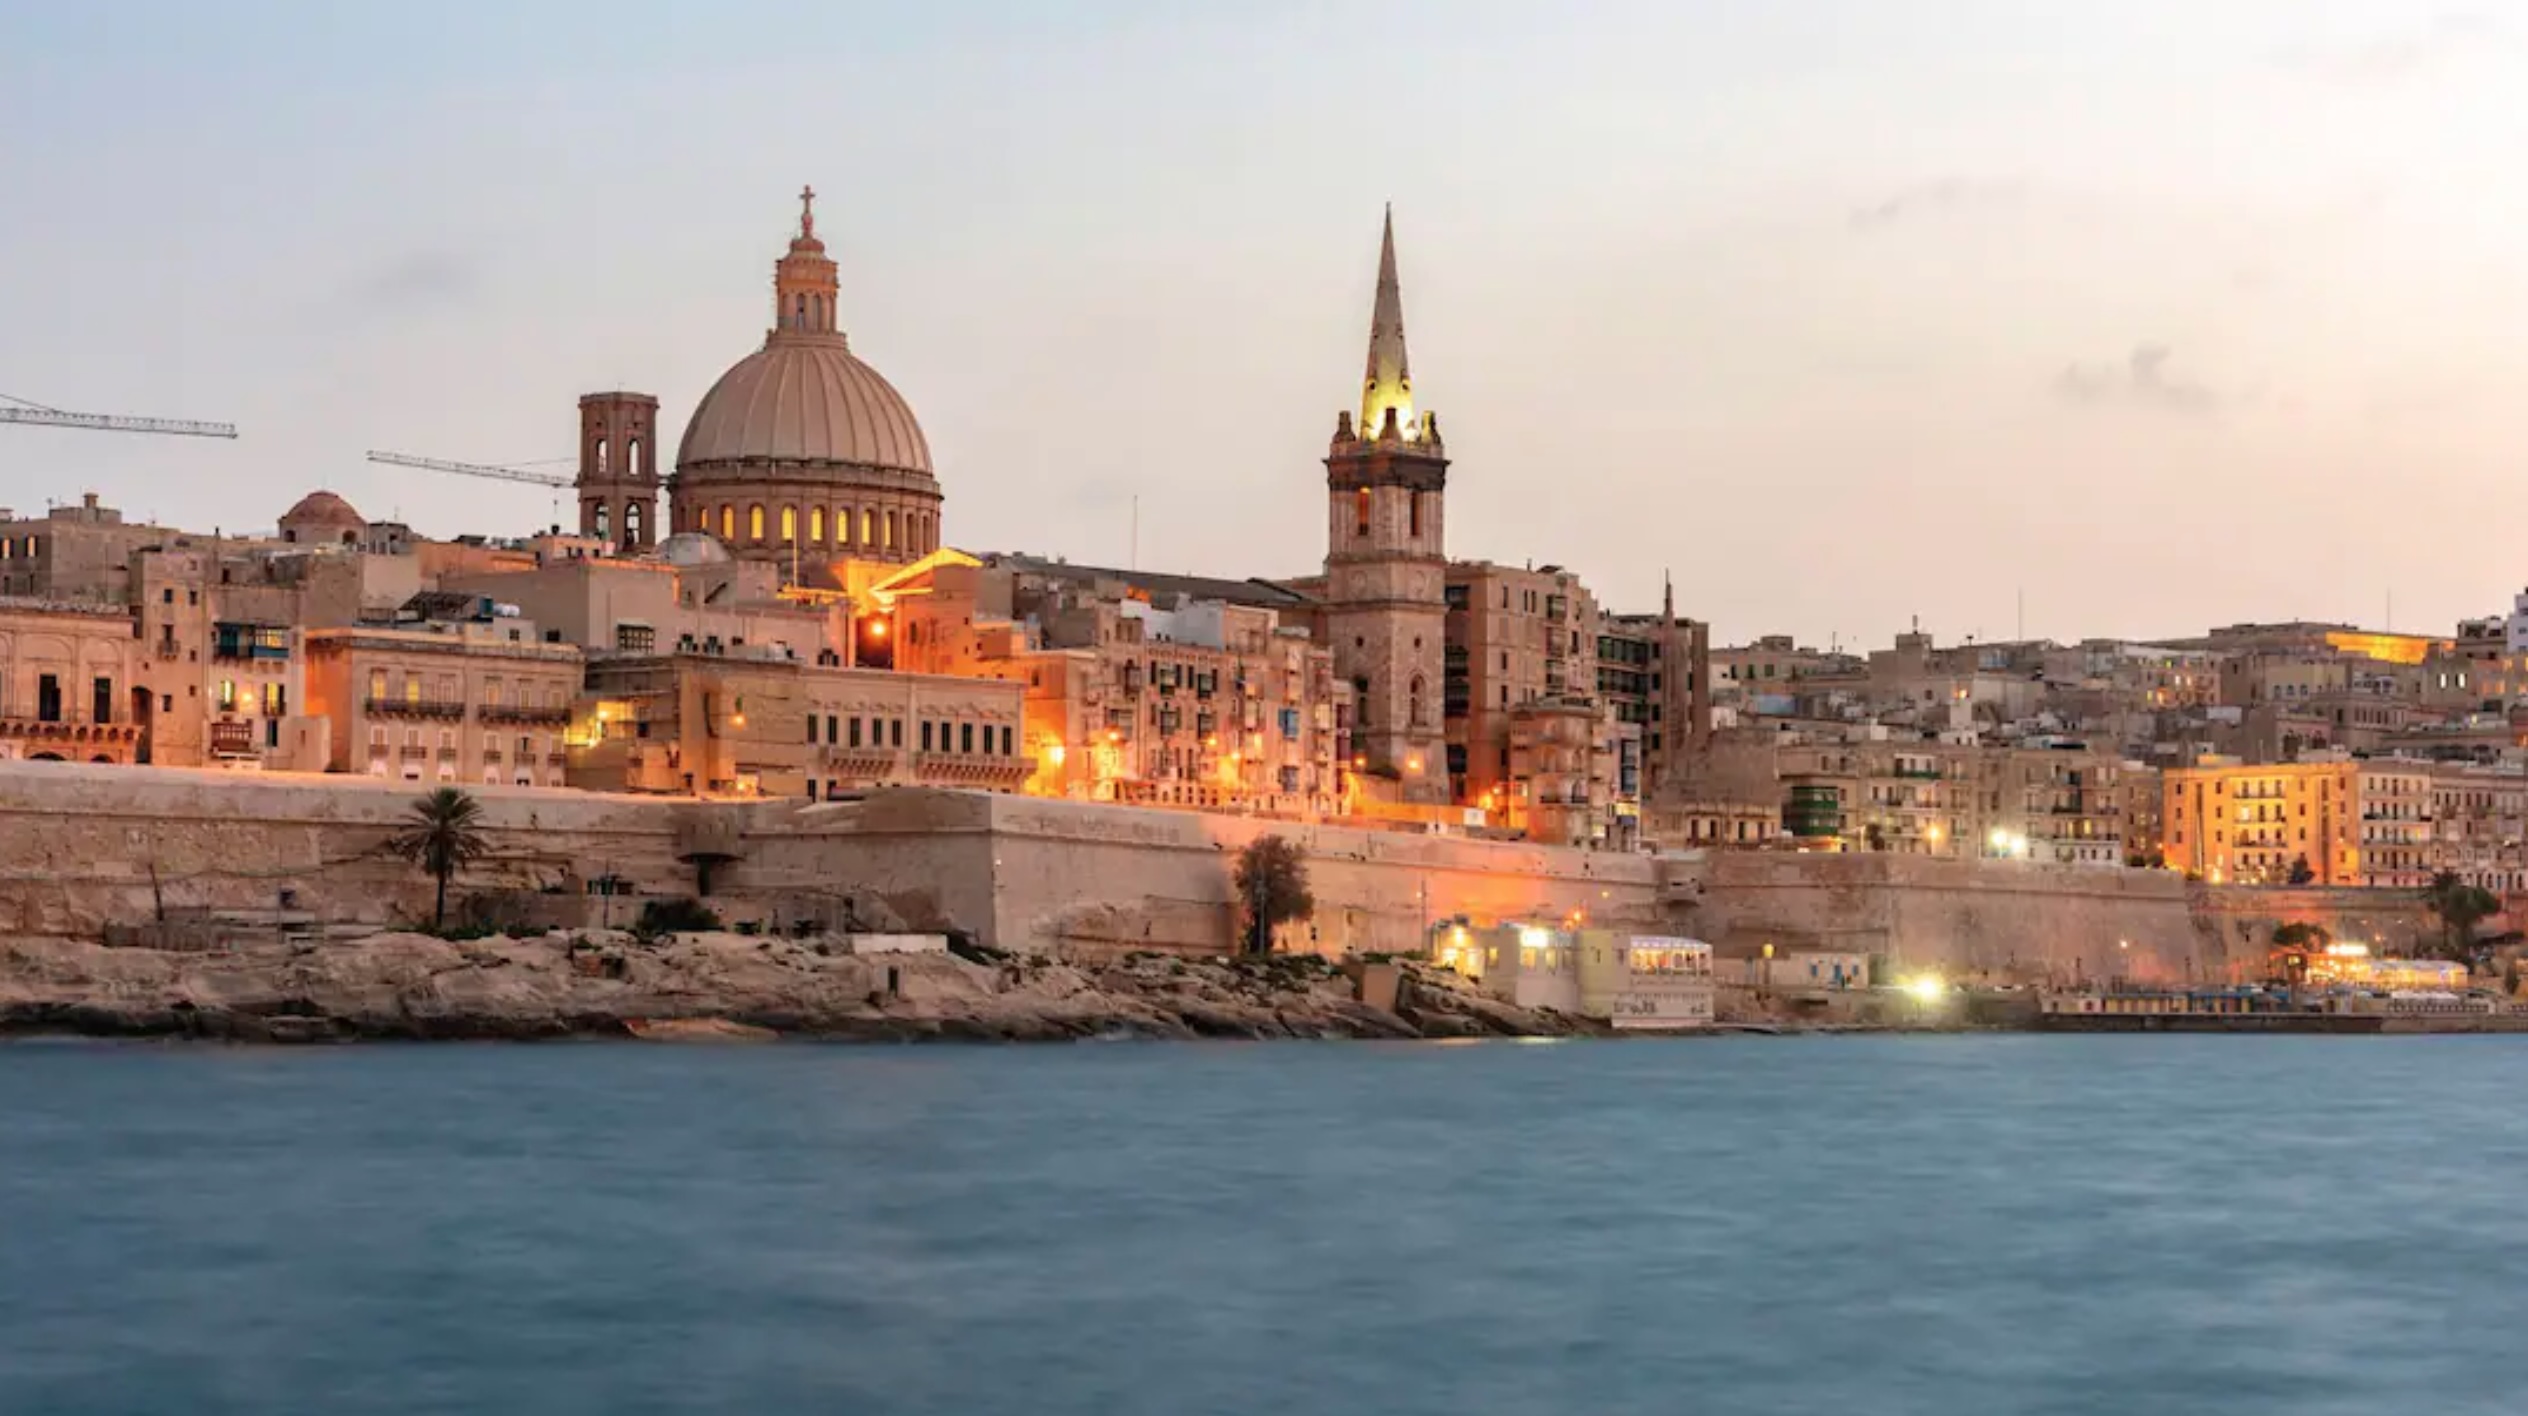 View of the city of Valletta from the sea at dusk